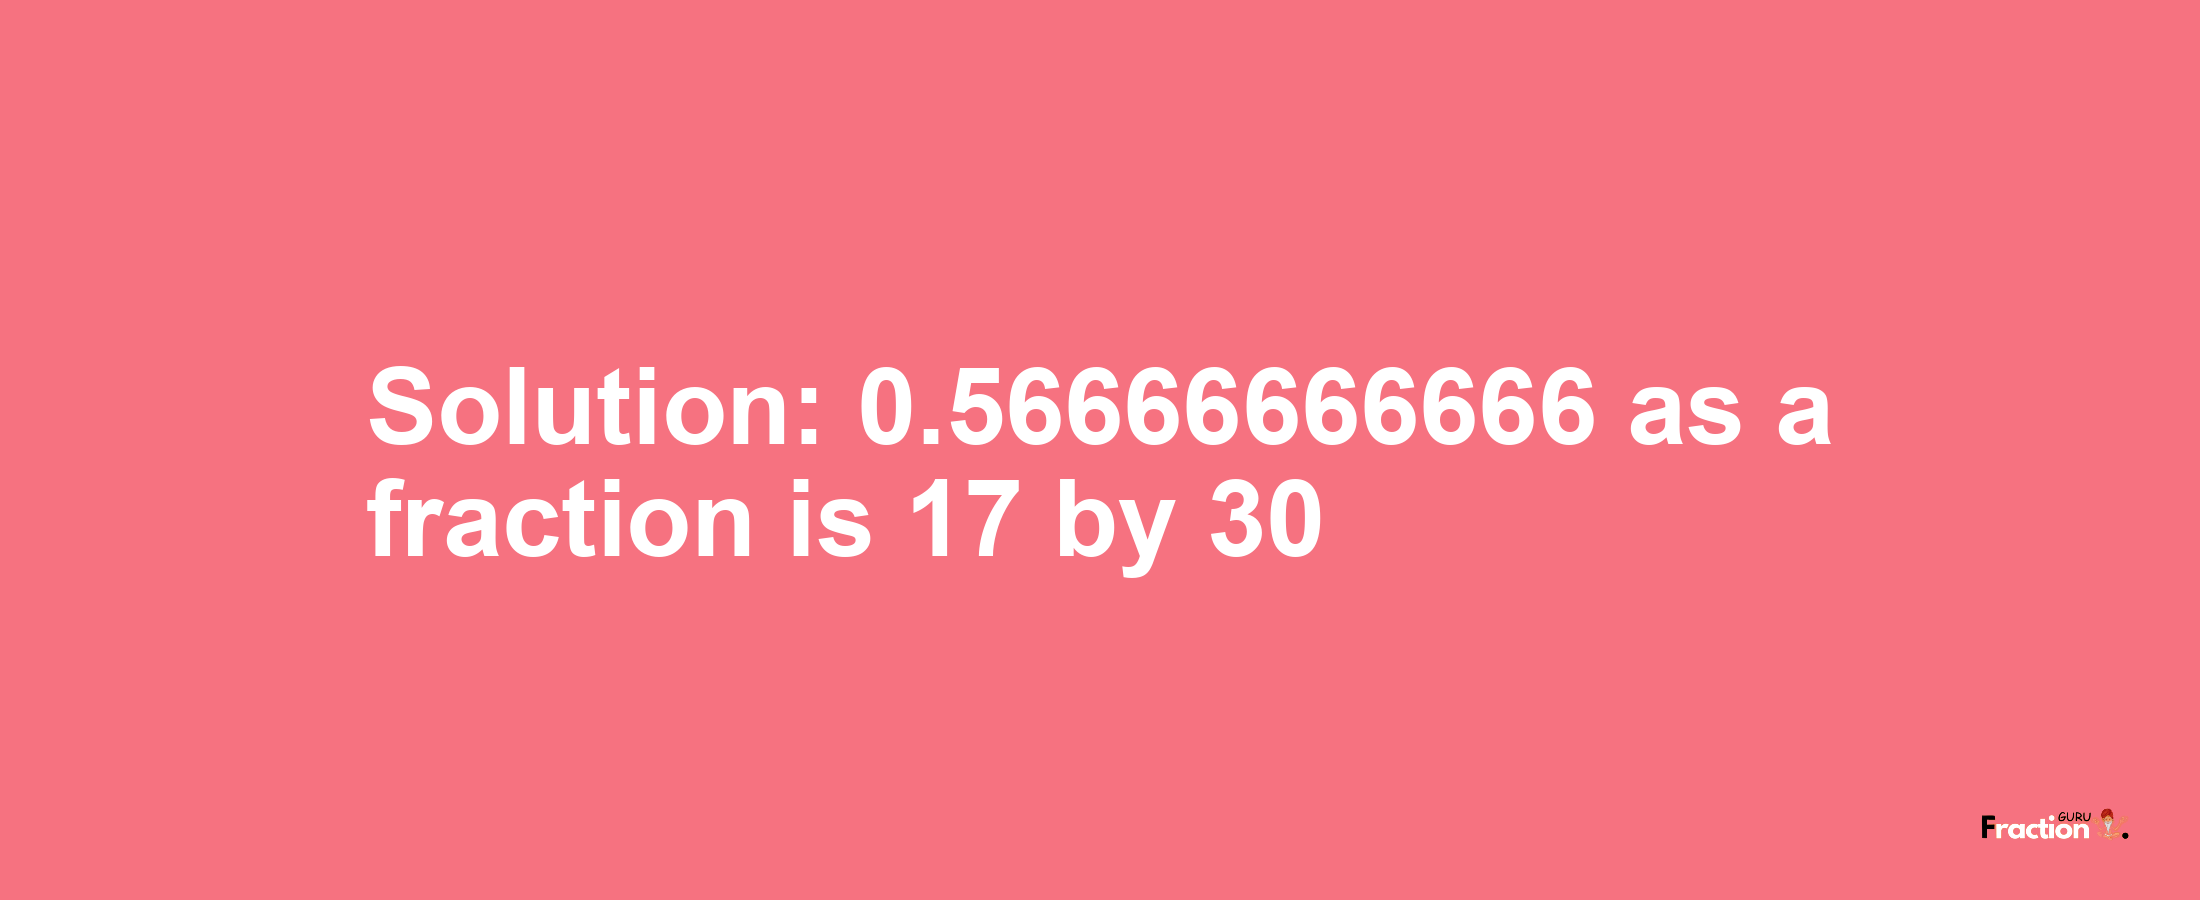 Solution:0.56666666666 as a fraction is 17/30